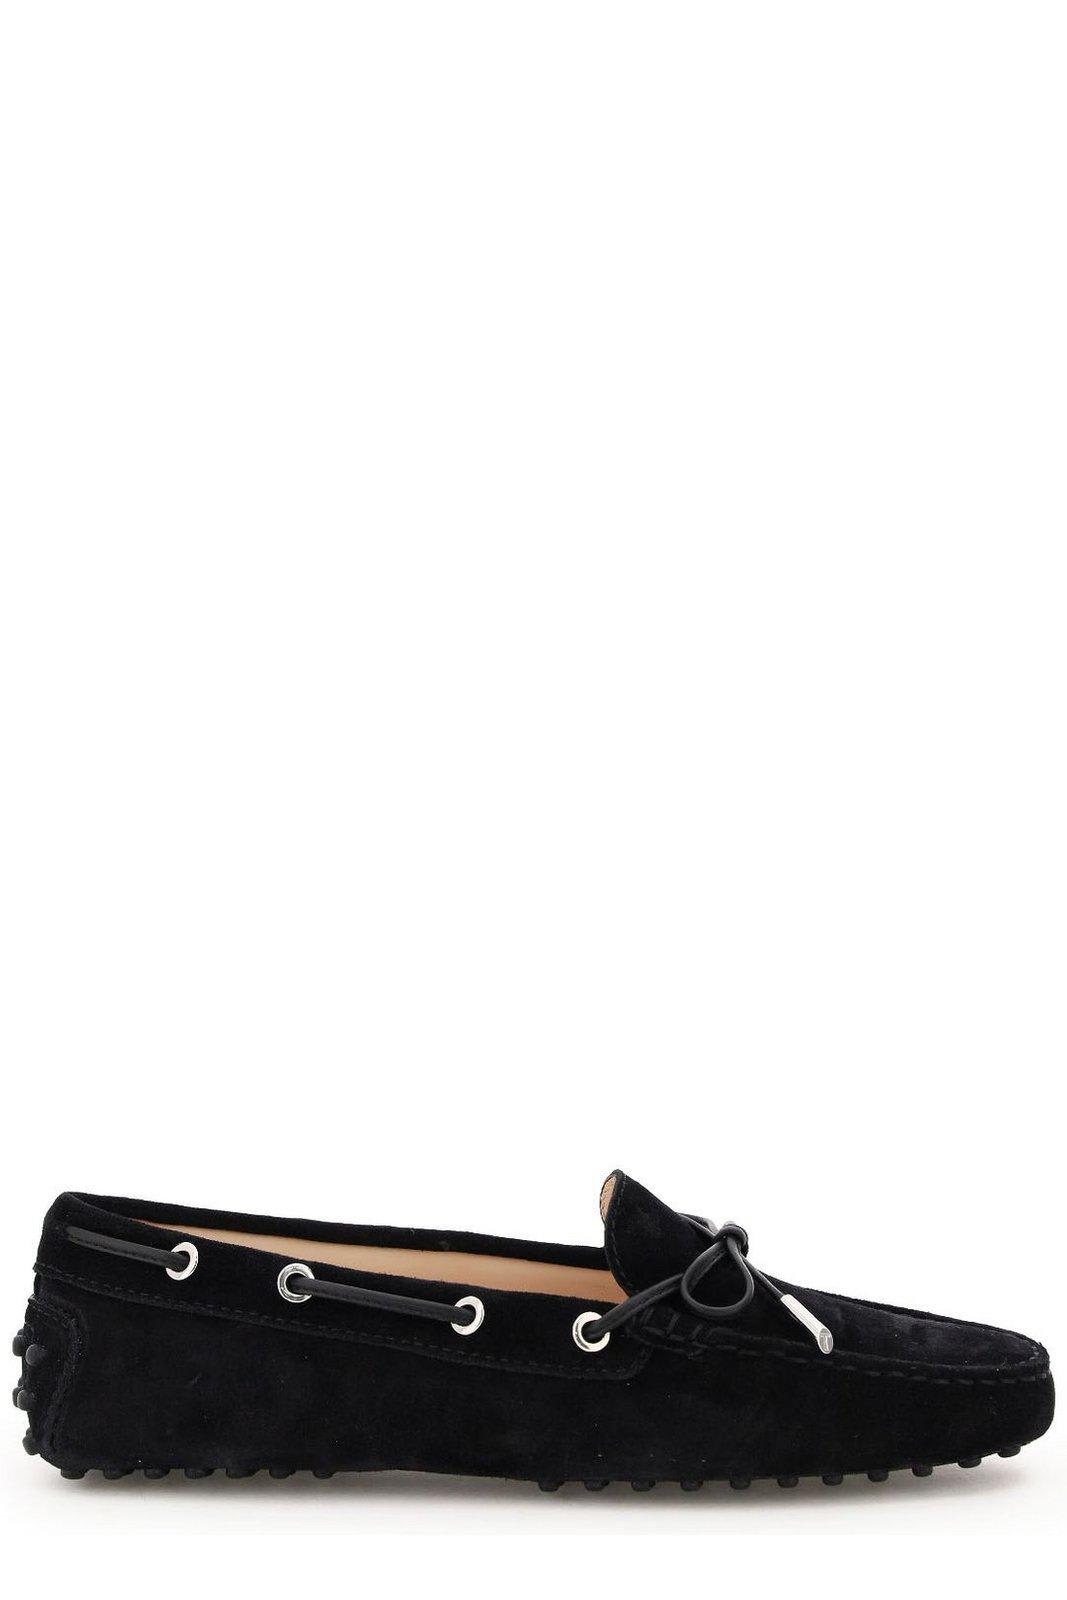 TOD'S GOMMINO DRIVING BOW MOCCASINS